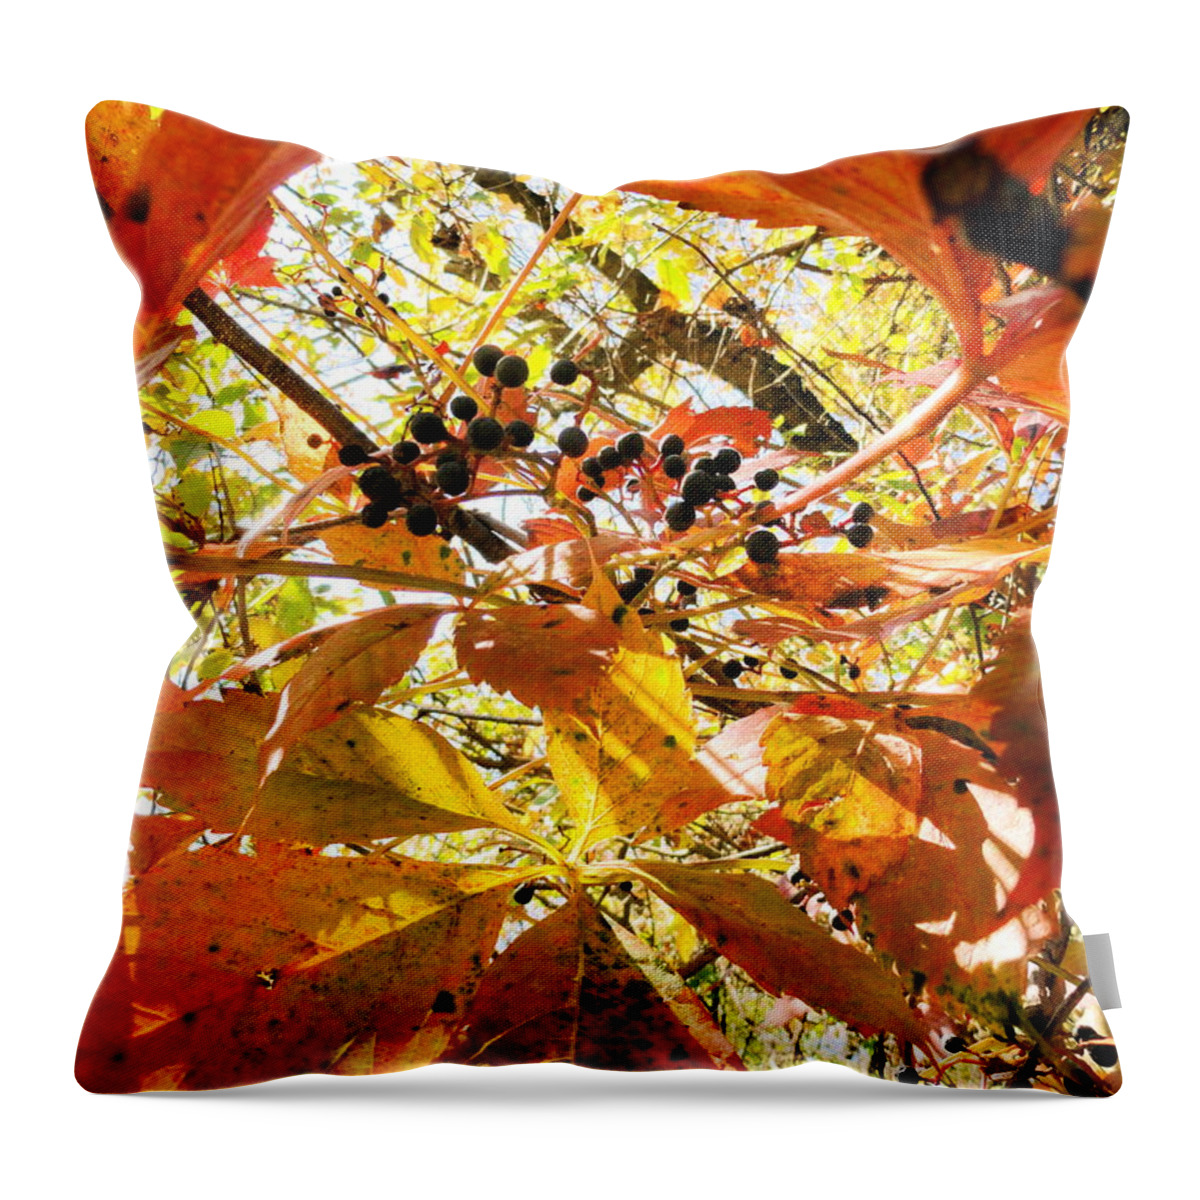 Leaves Throw Pillow featuring the photograph The Beauty In Dying by Trish Hale